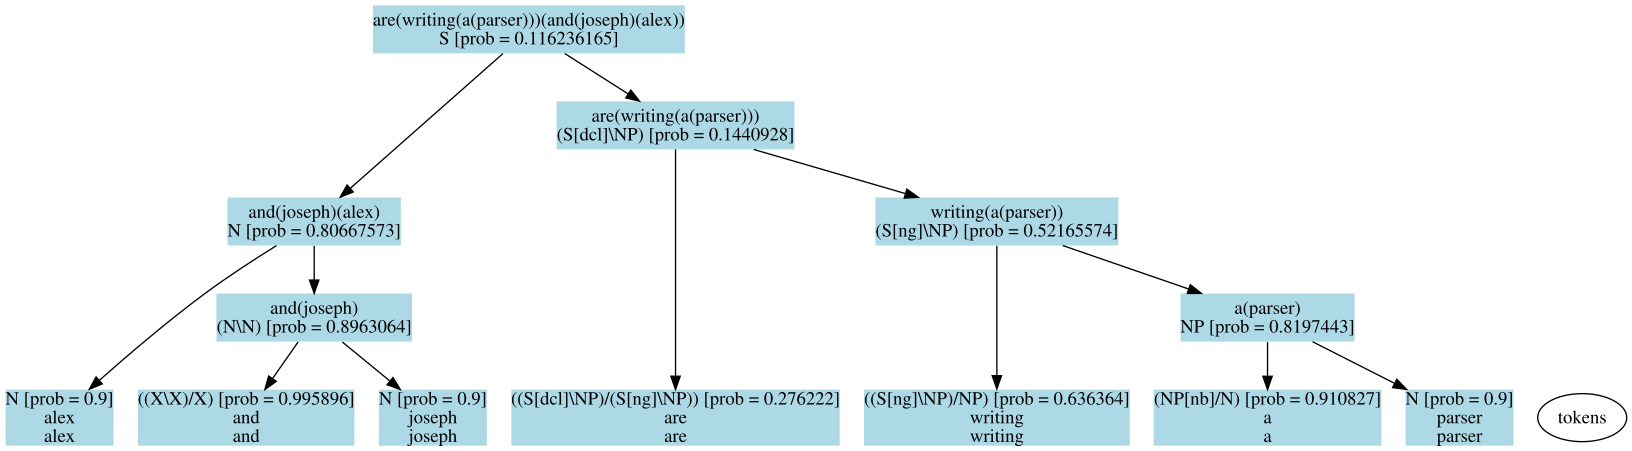 An example syntactic parse tree